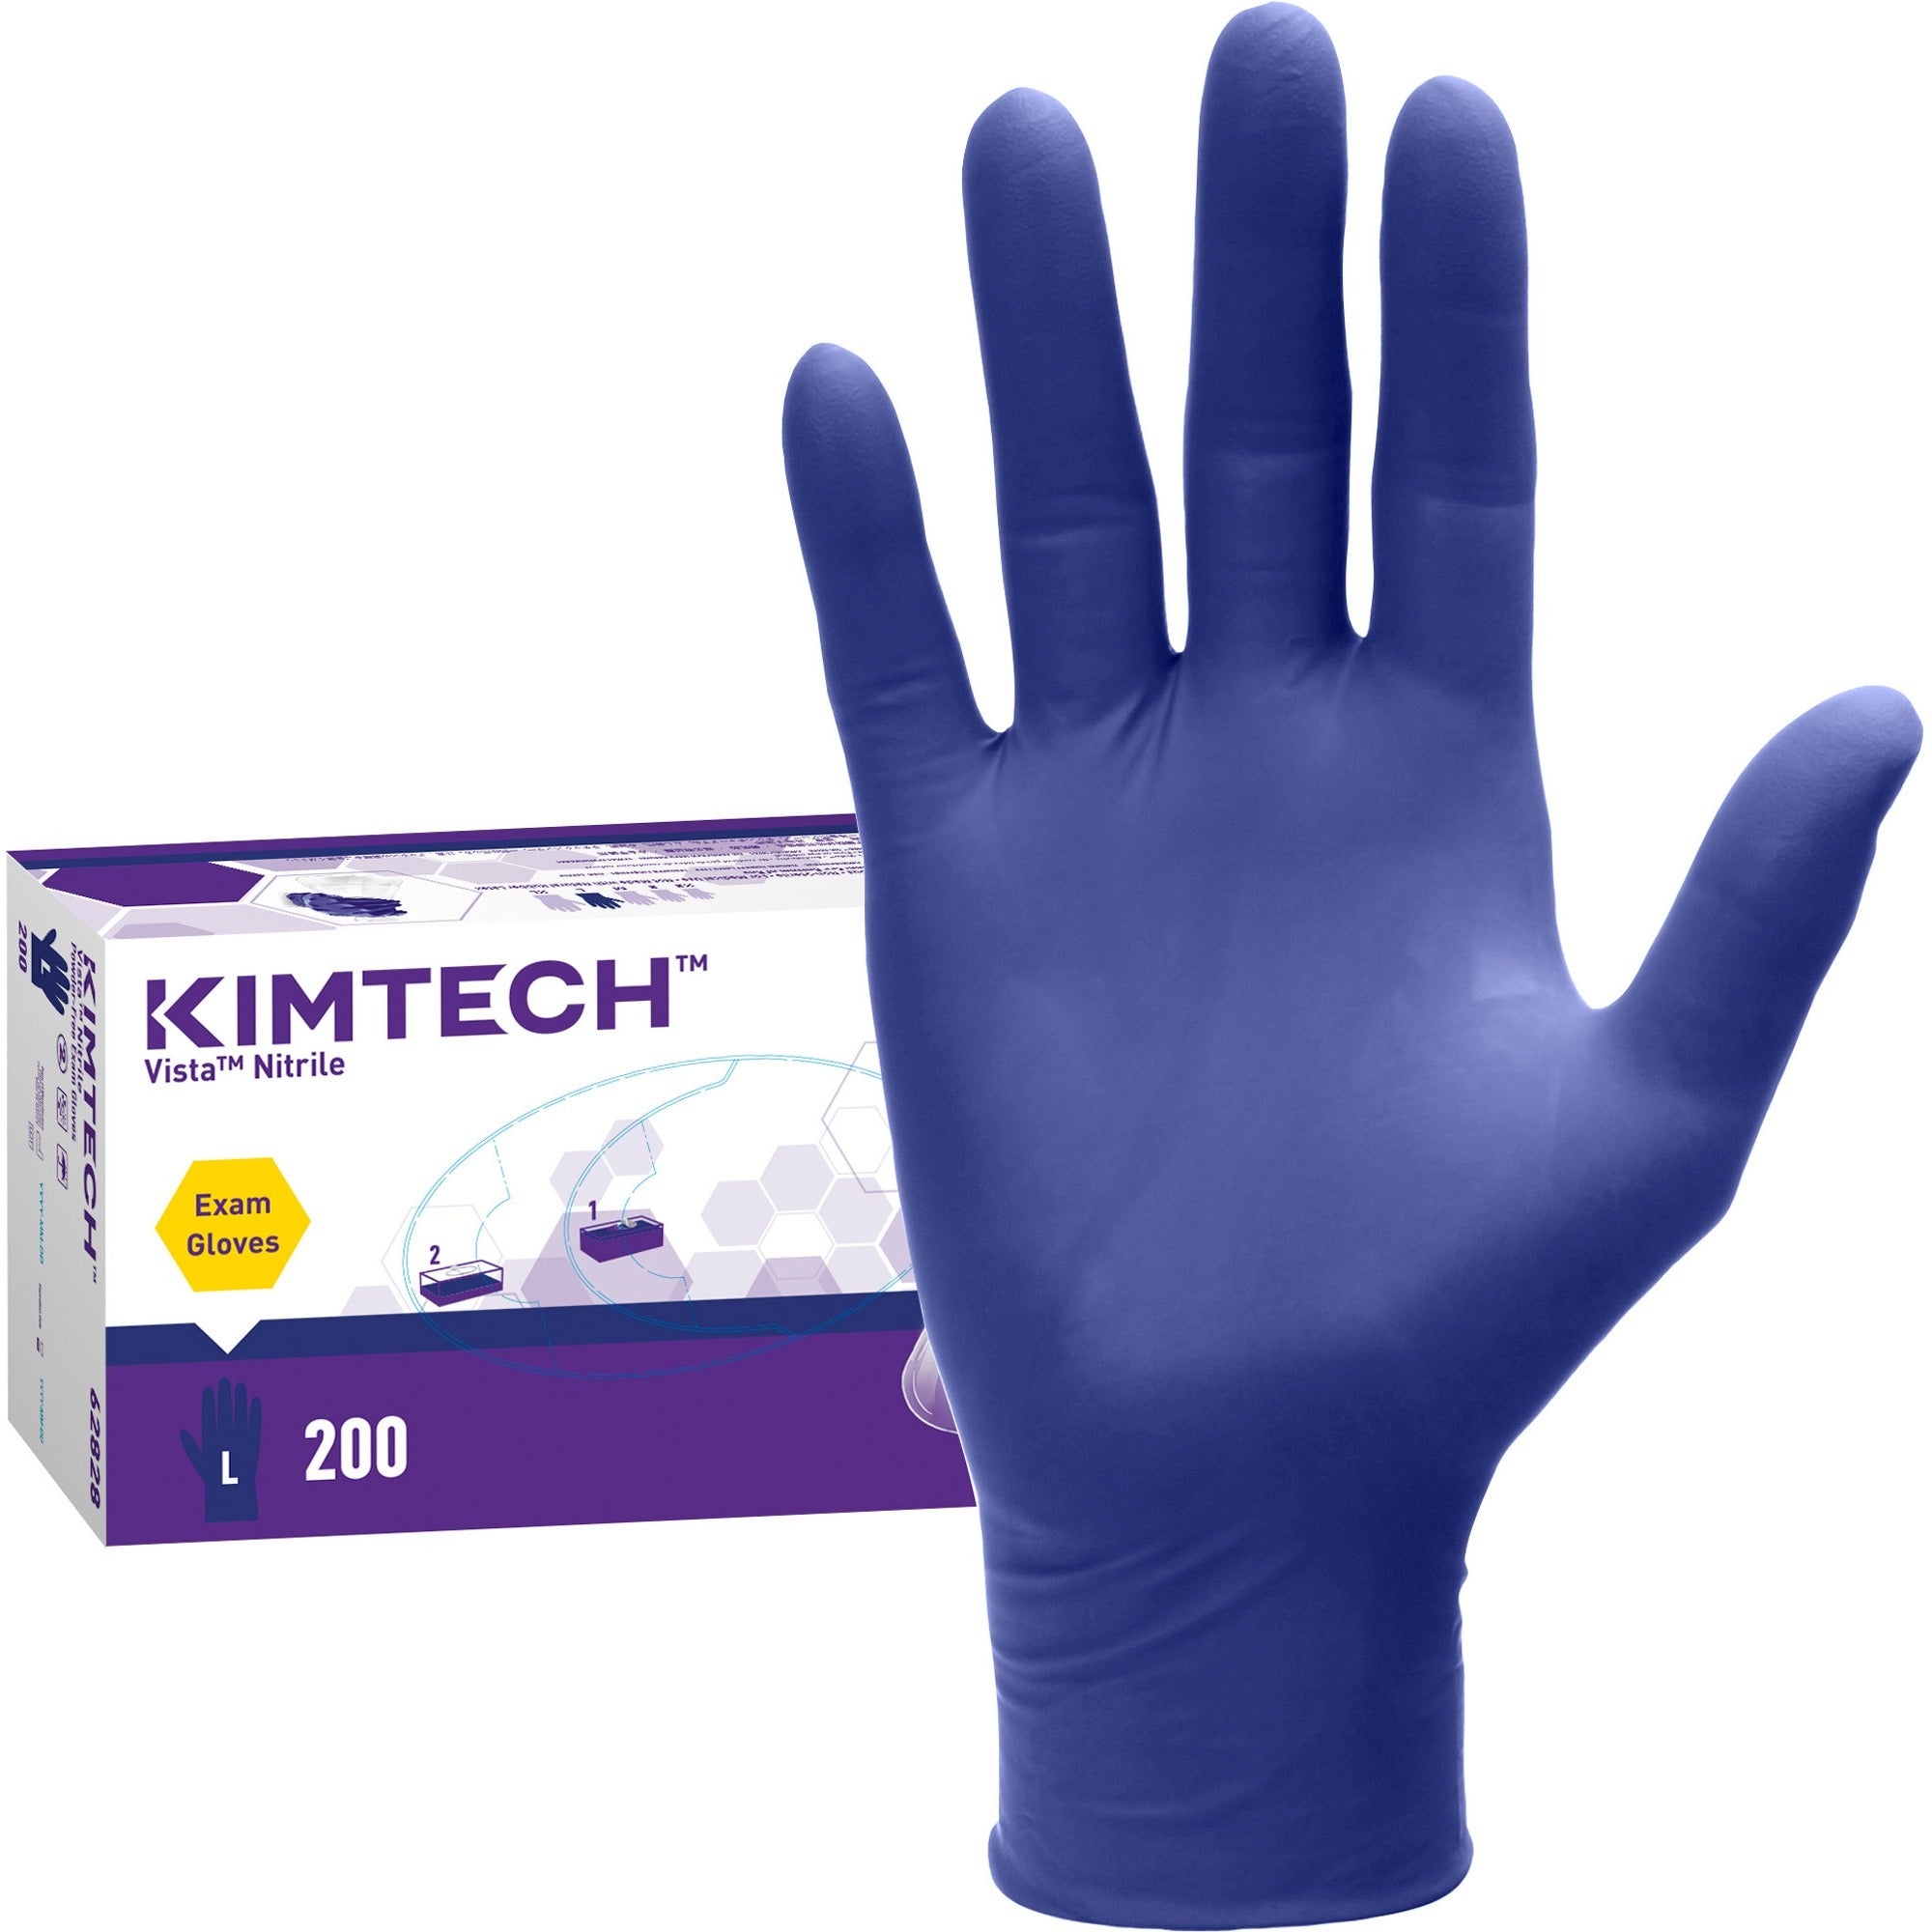 kimtech-vista-nitrile-exam-gloves-large-size-for-right-left-hand-nitrile-blue-recyclable-textured-fingertip-powdered-non-sterile-for-laboratory-application-200-box-47-mil-thickness-950-glove-length_kcc62828 - 1